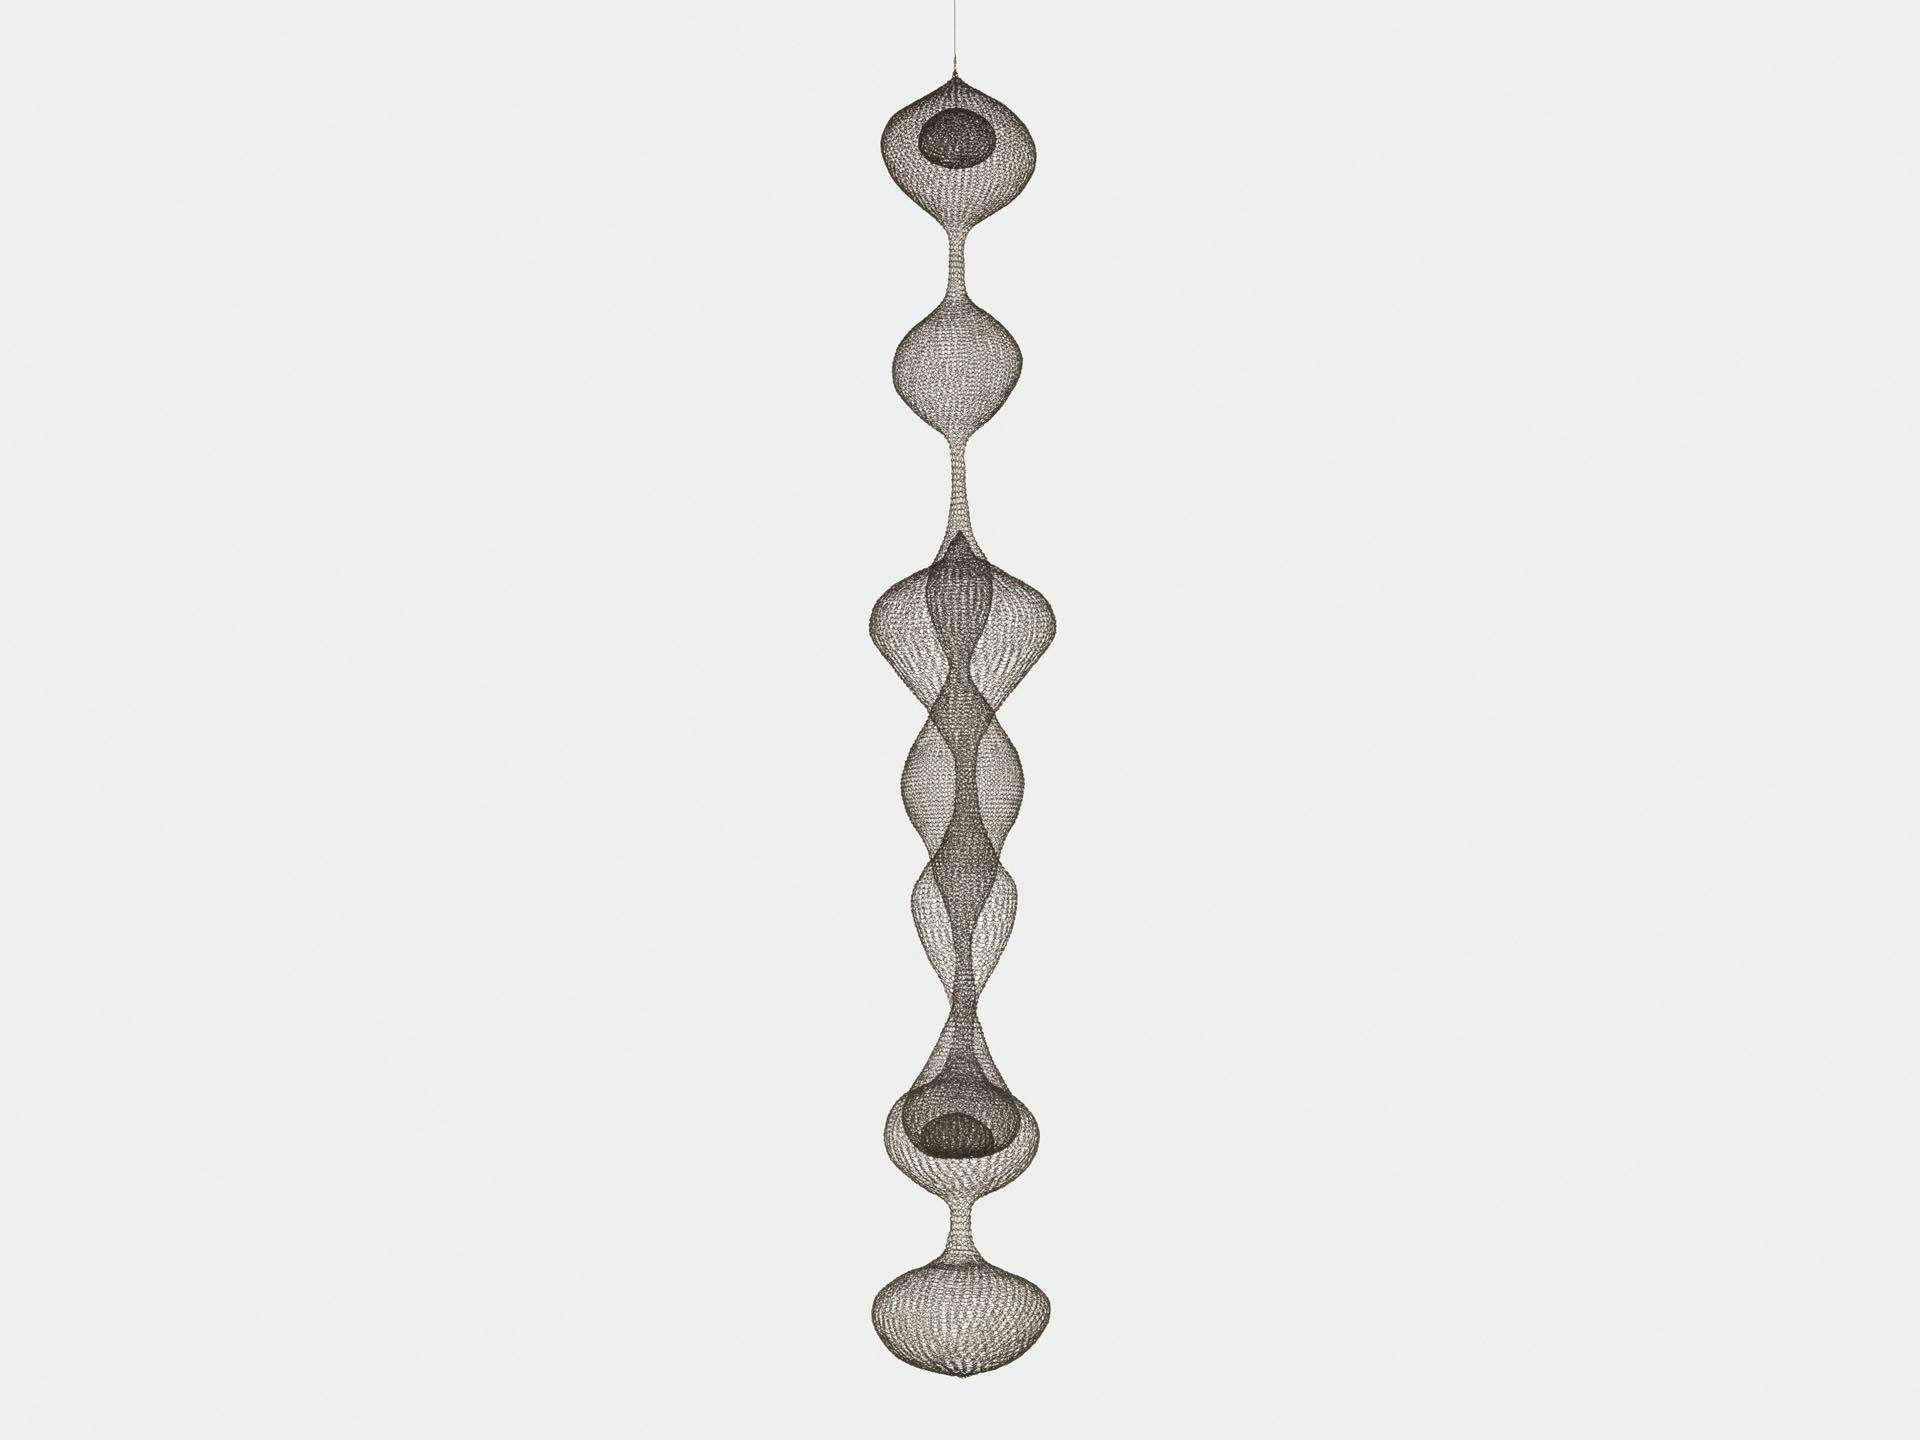 A sculpture by Ruth Asawa, titled Untitled (S.272, Hanging Seven-Lobed, Continuous Interwoven Form, with Spheres within Two Lobes), dated  circa 1954.